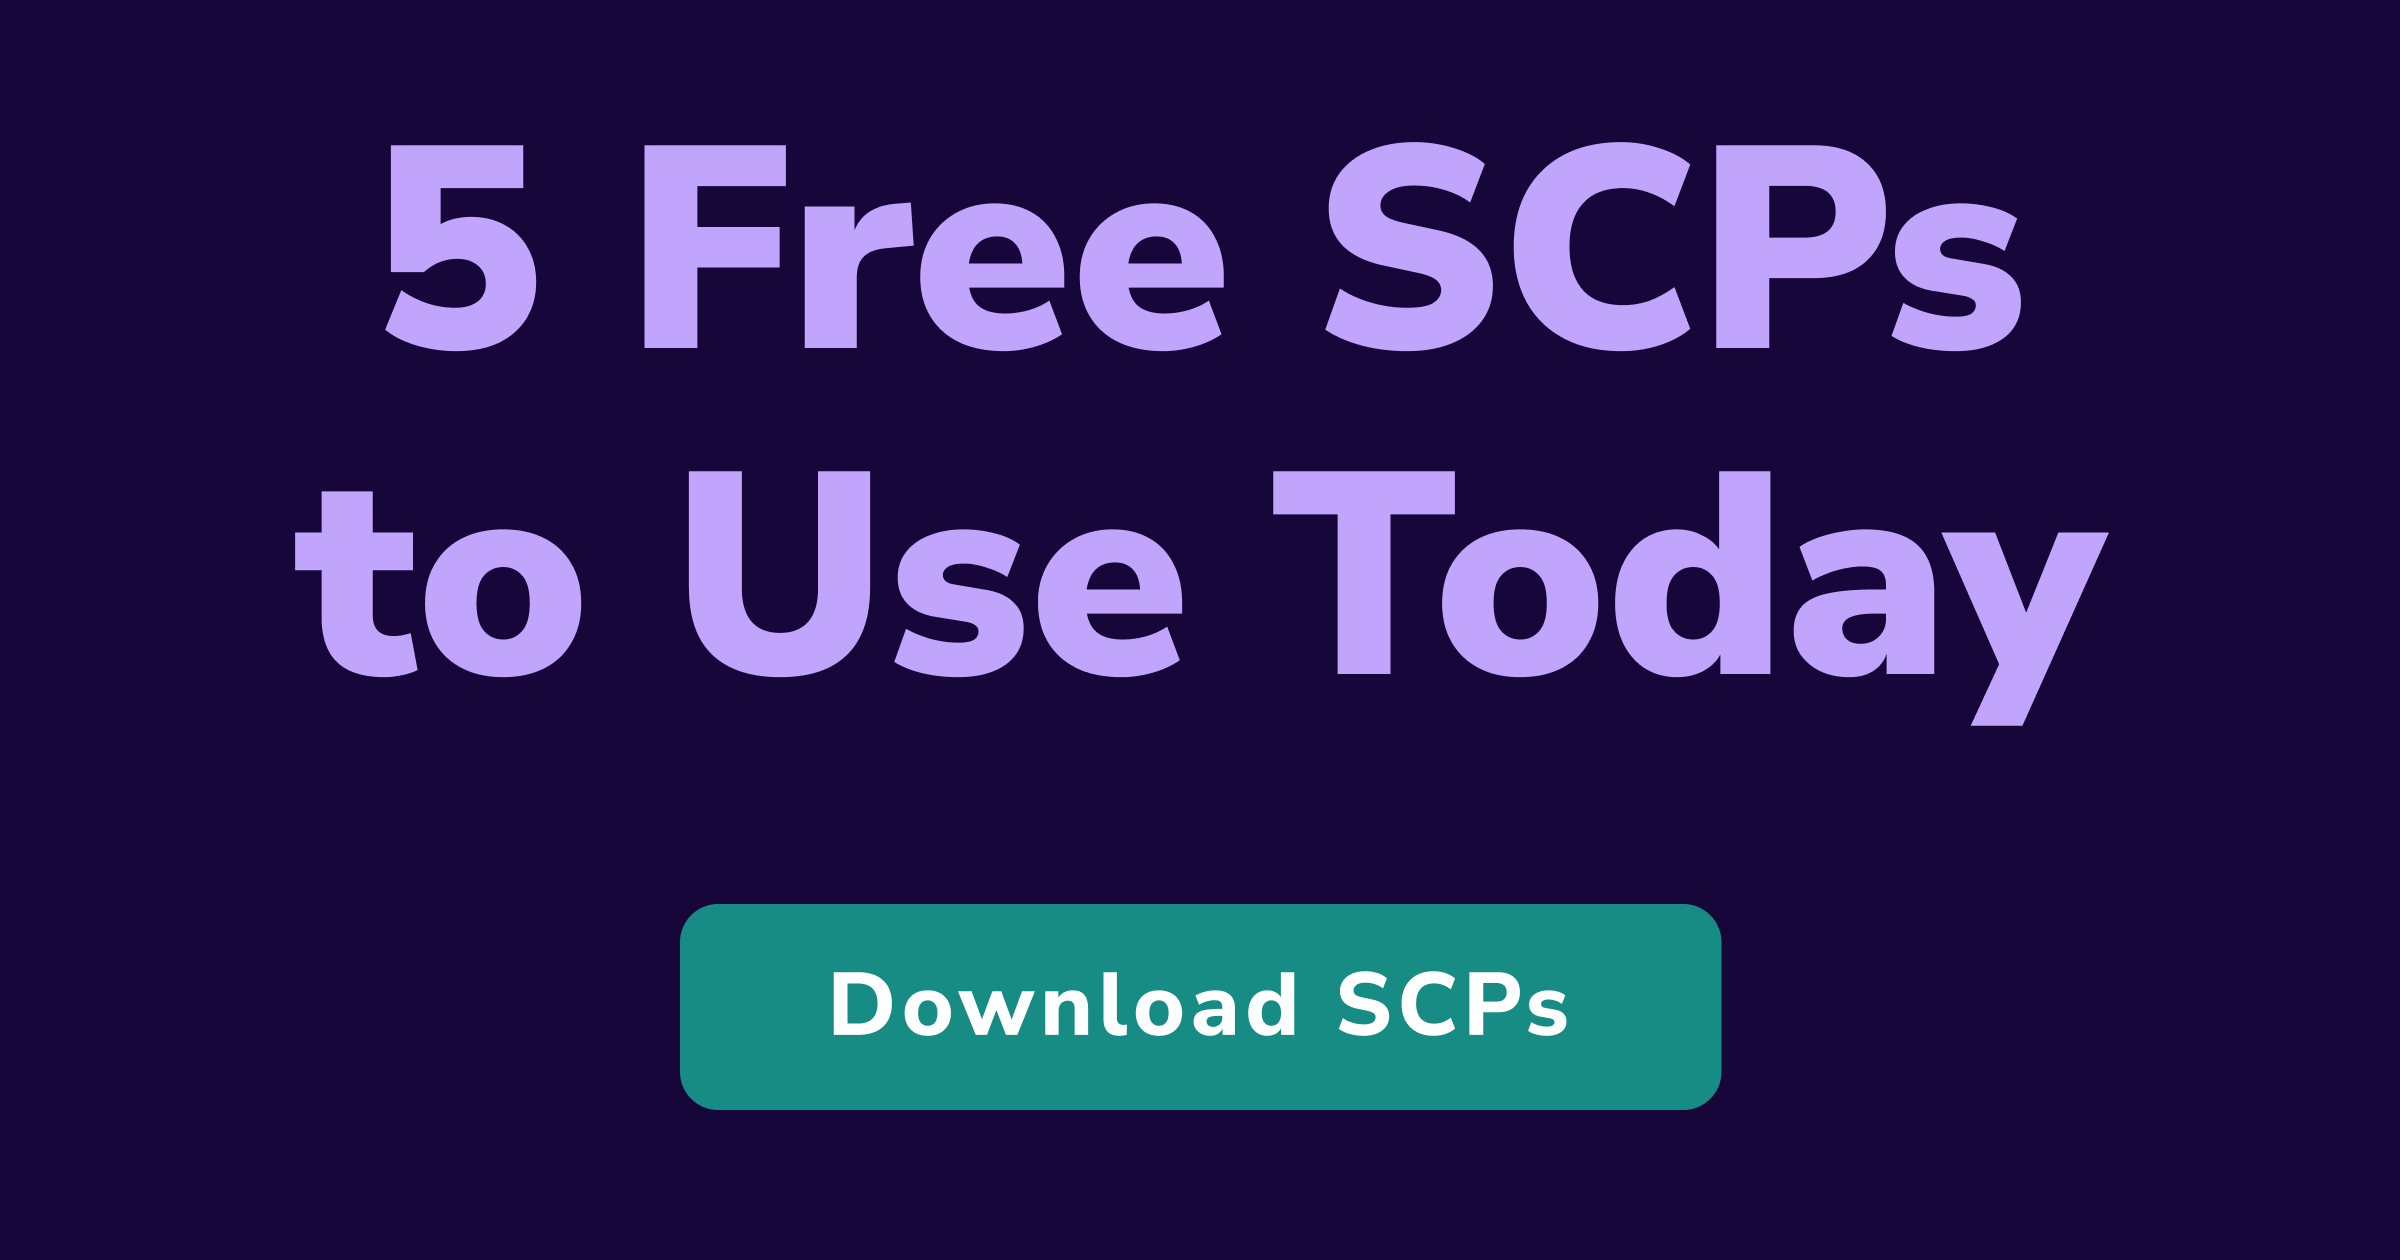 5 Free SCPs to Use Today